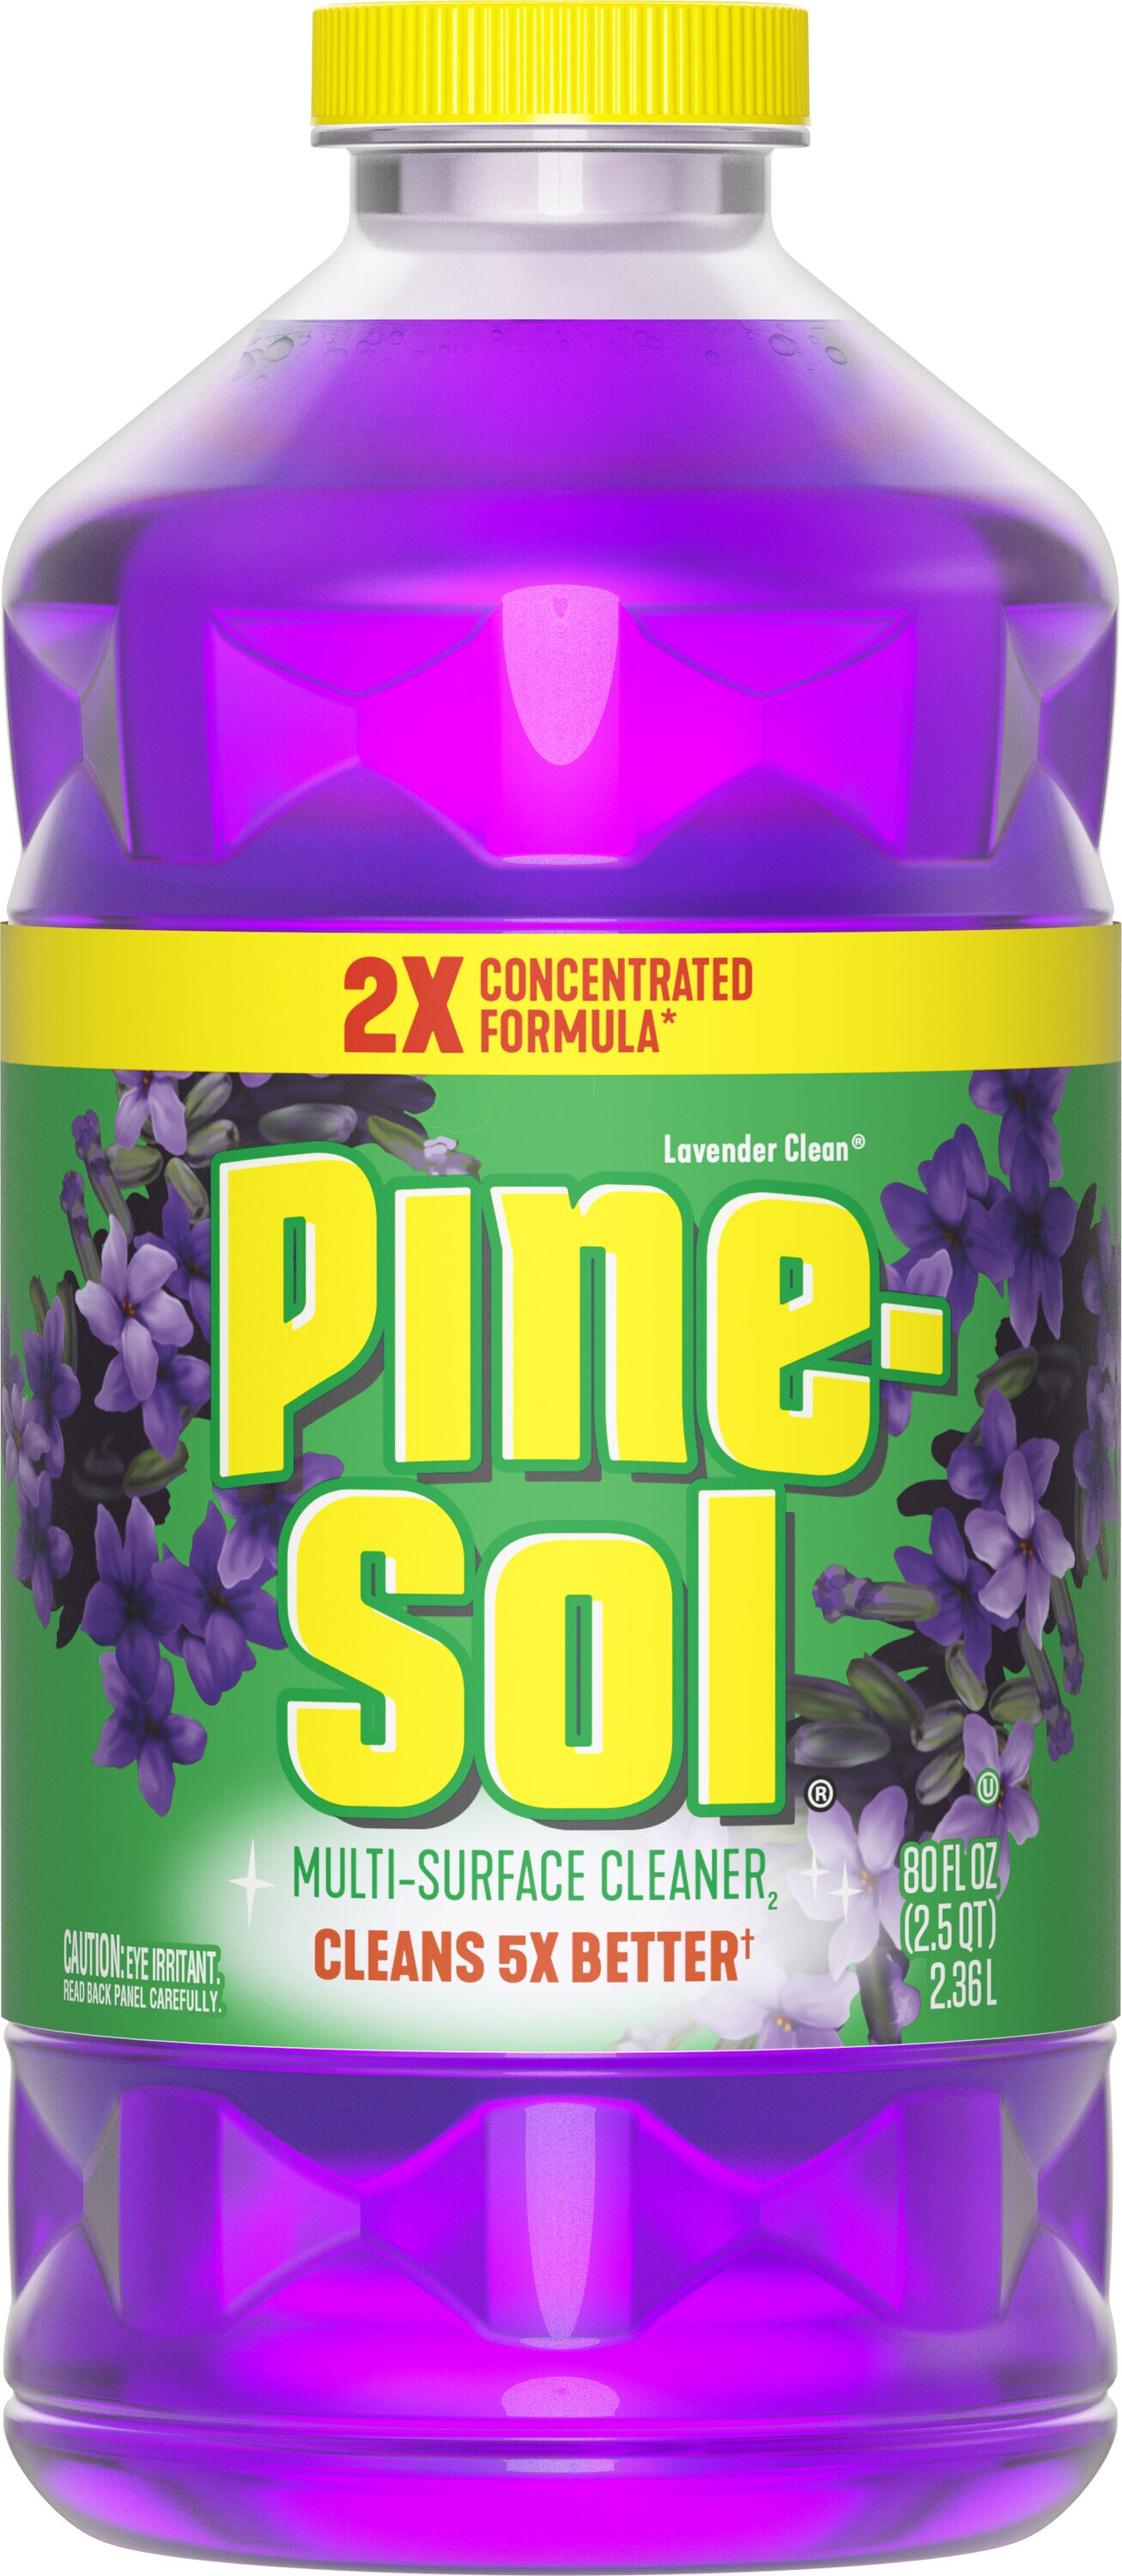 Pine-Sol All Purpose Multi-Surface Lavender Clean Cleaner, 48 fl